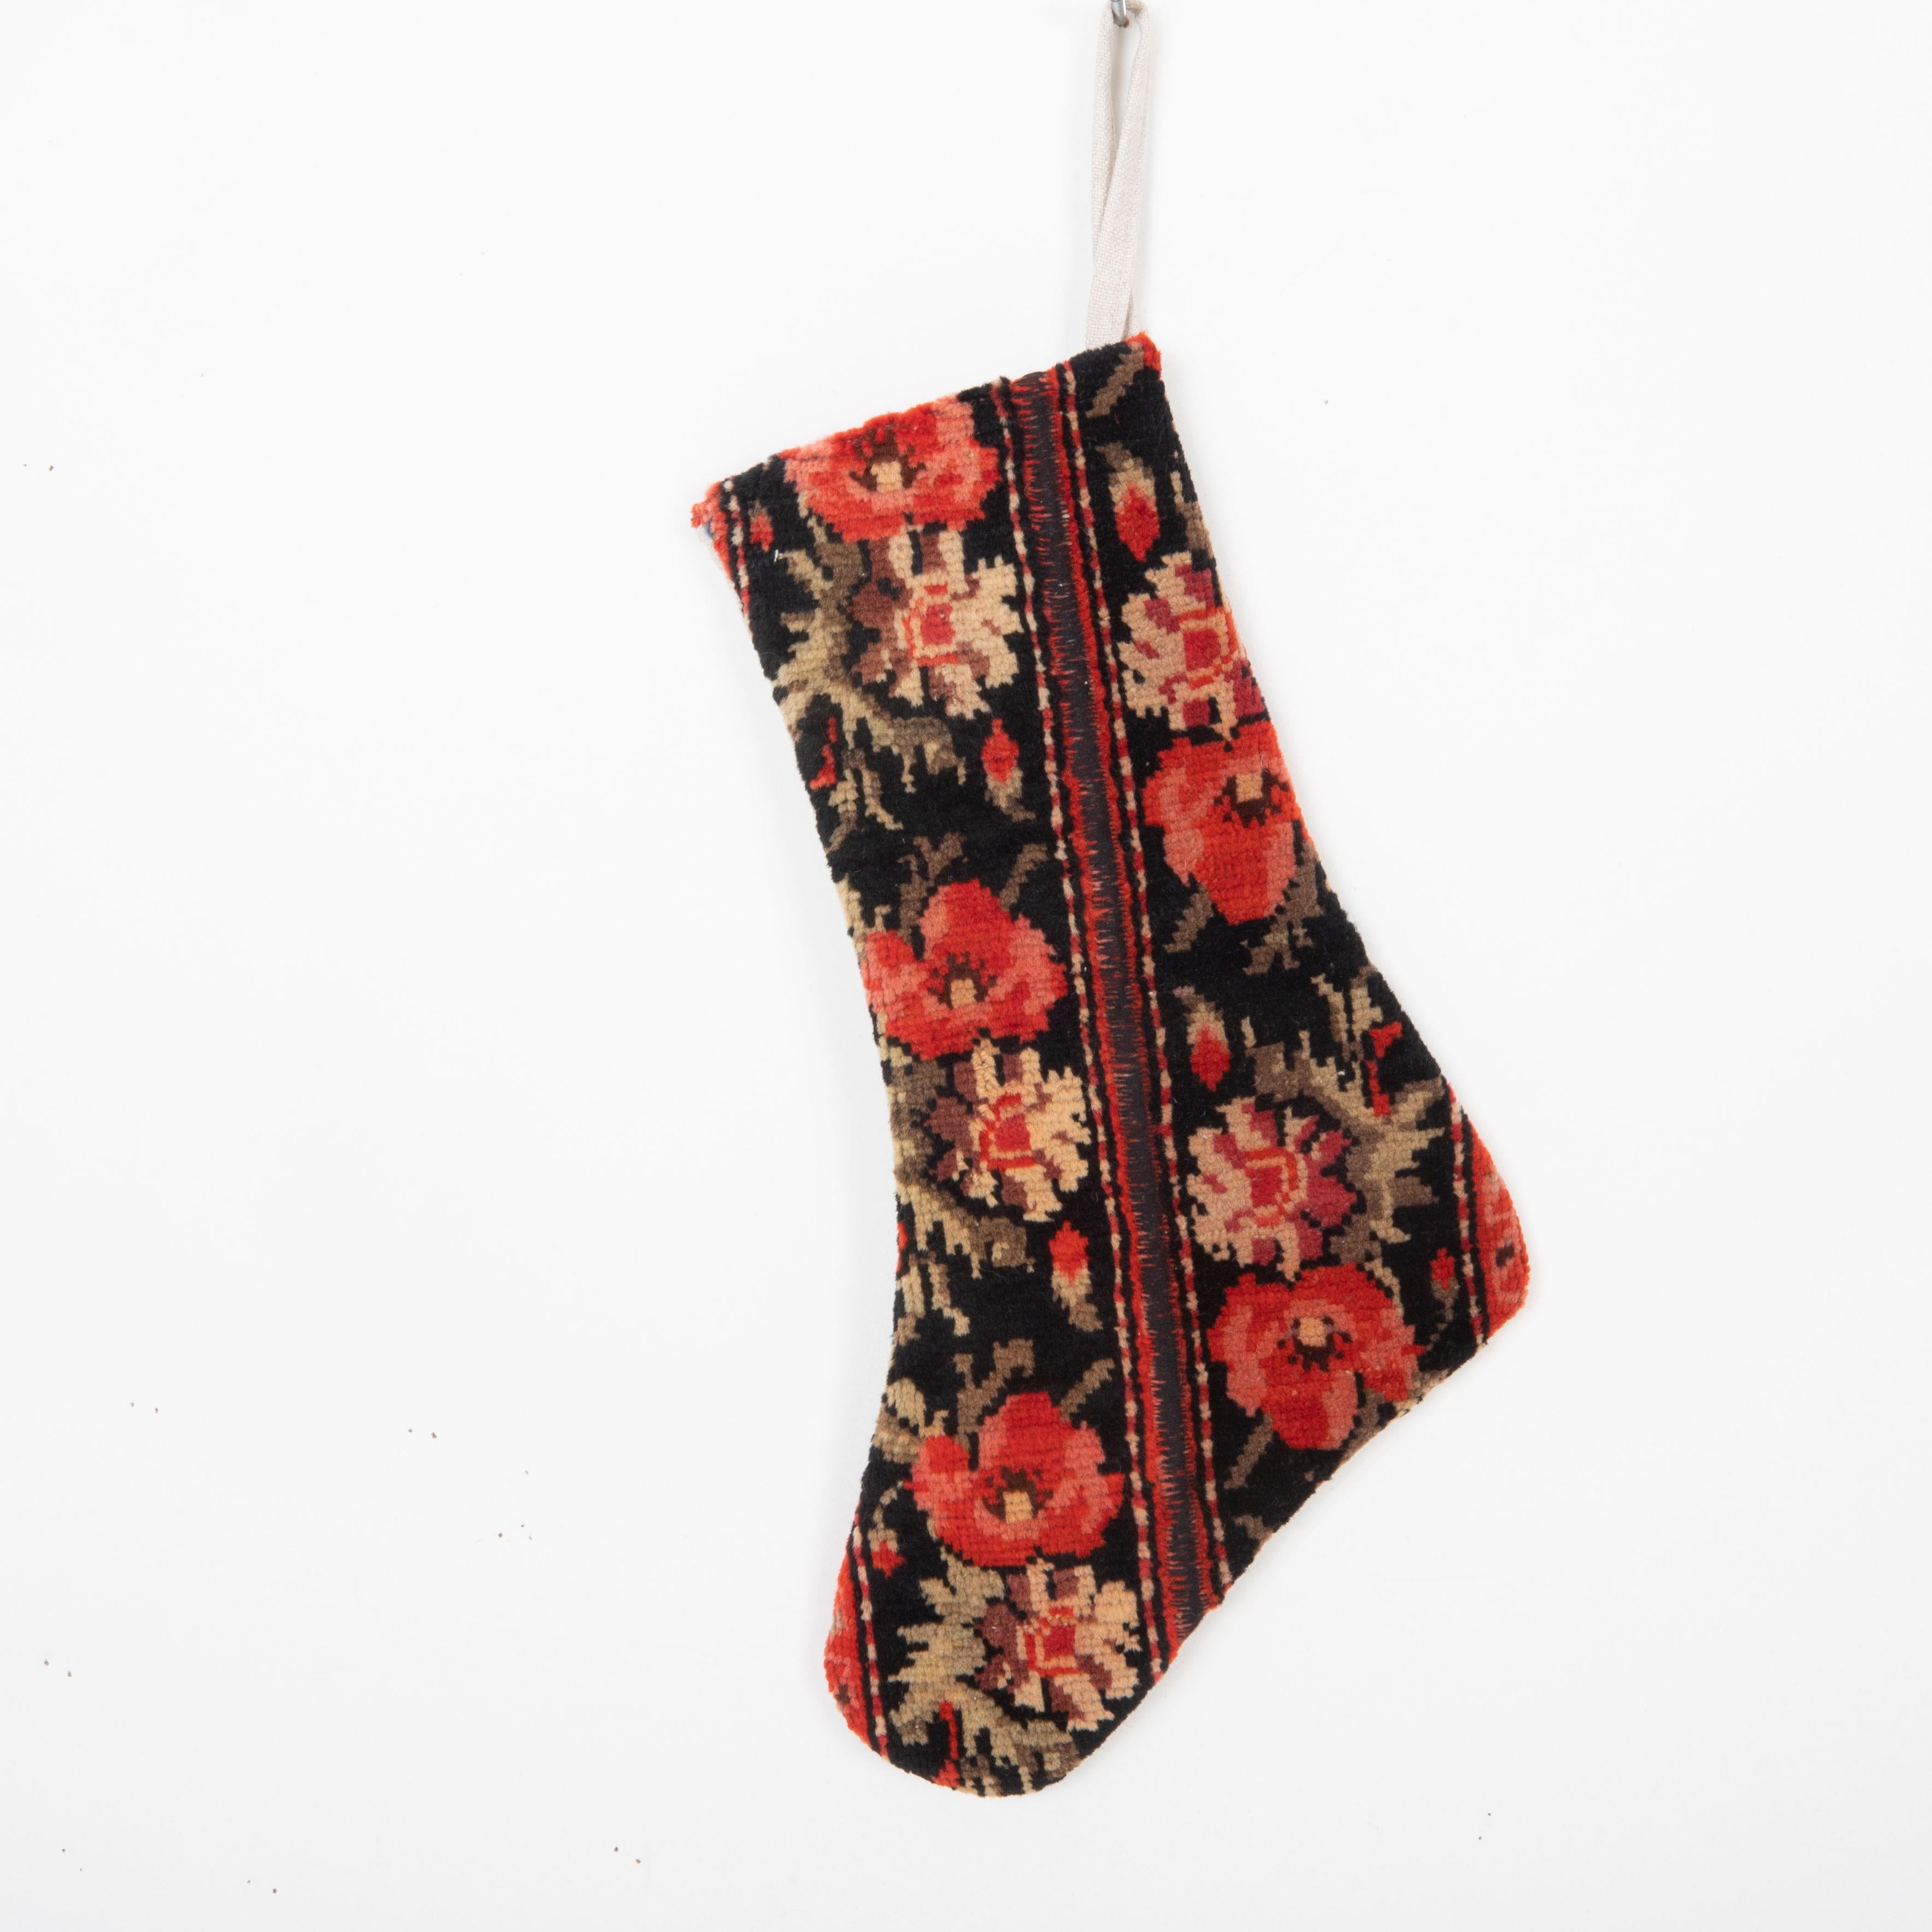 This Christmas Stocking was made from a late 19th or Early 20th C. Caucasıan rug fragments.
Linen in the back.
